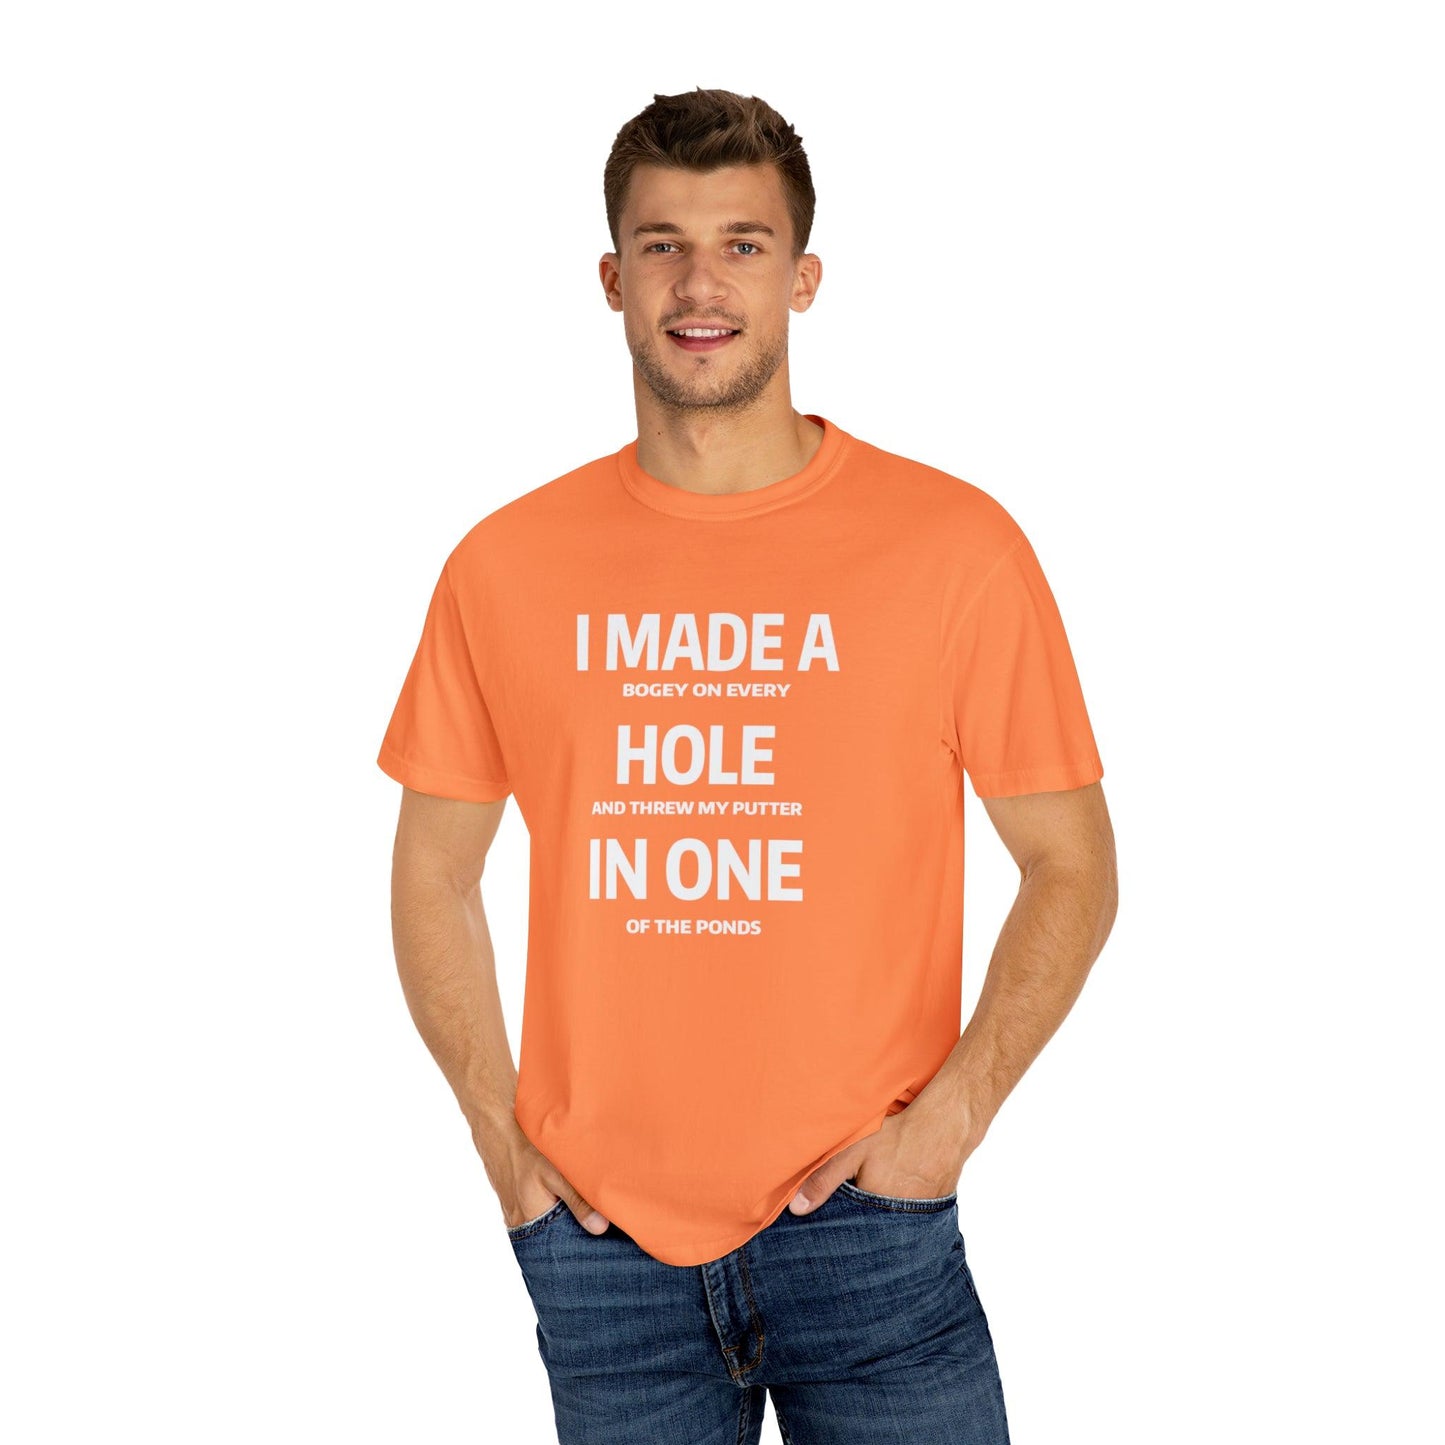 Putt It Behind You: The Golf T-Shirt for Letting Go of Mistakes - Pandaize